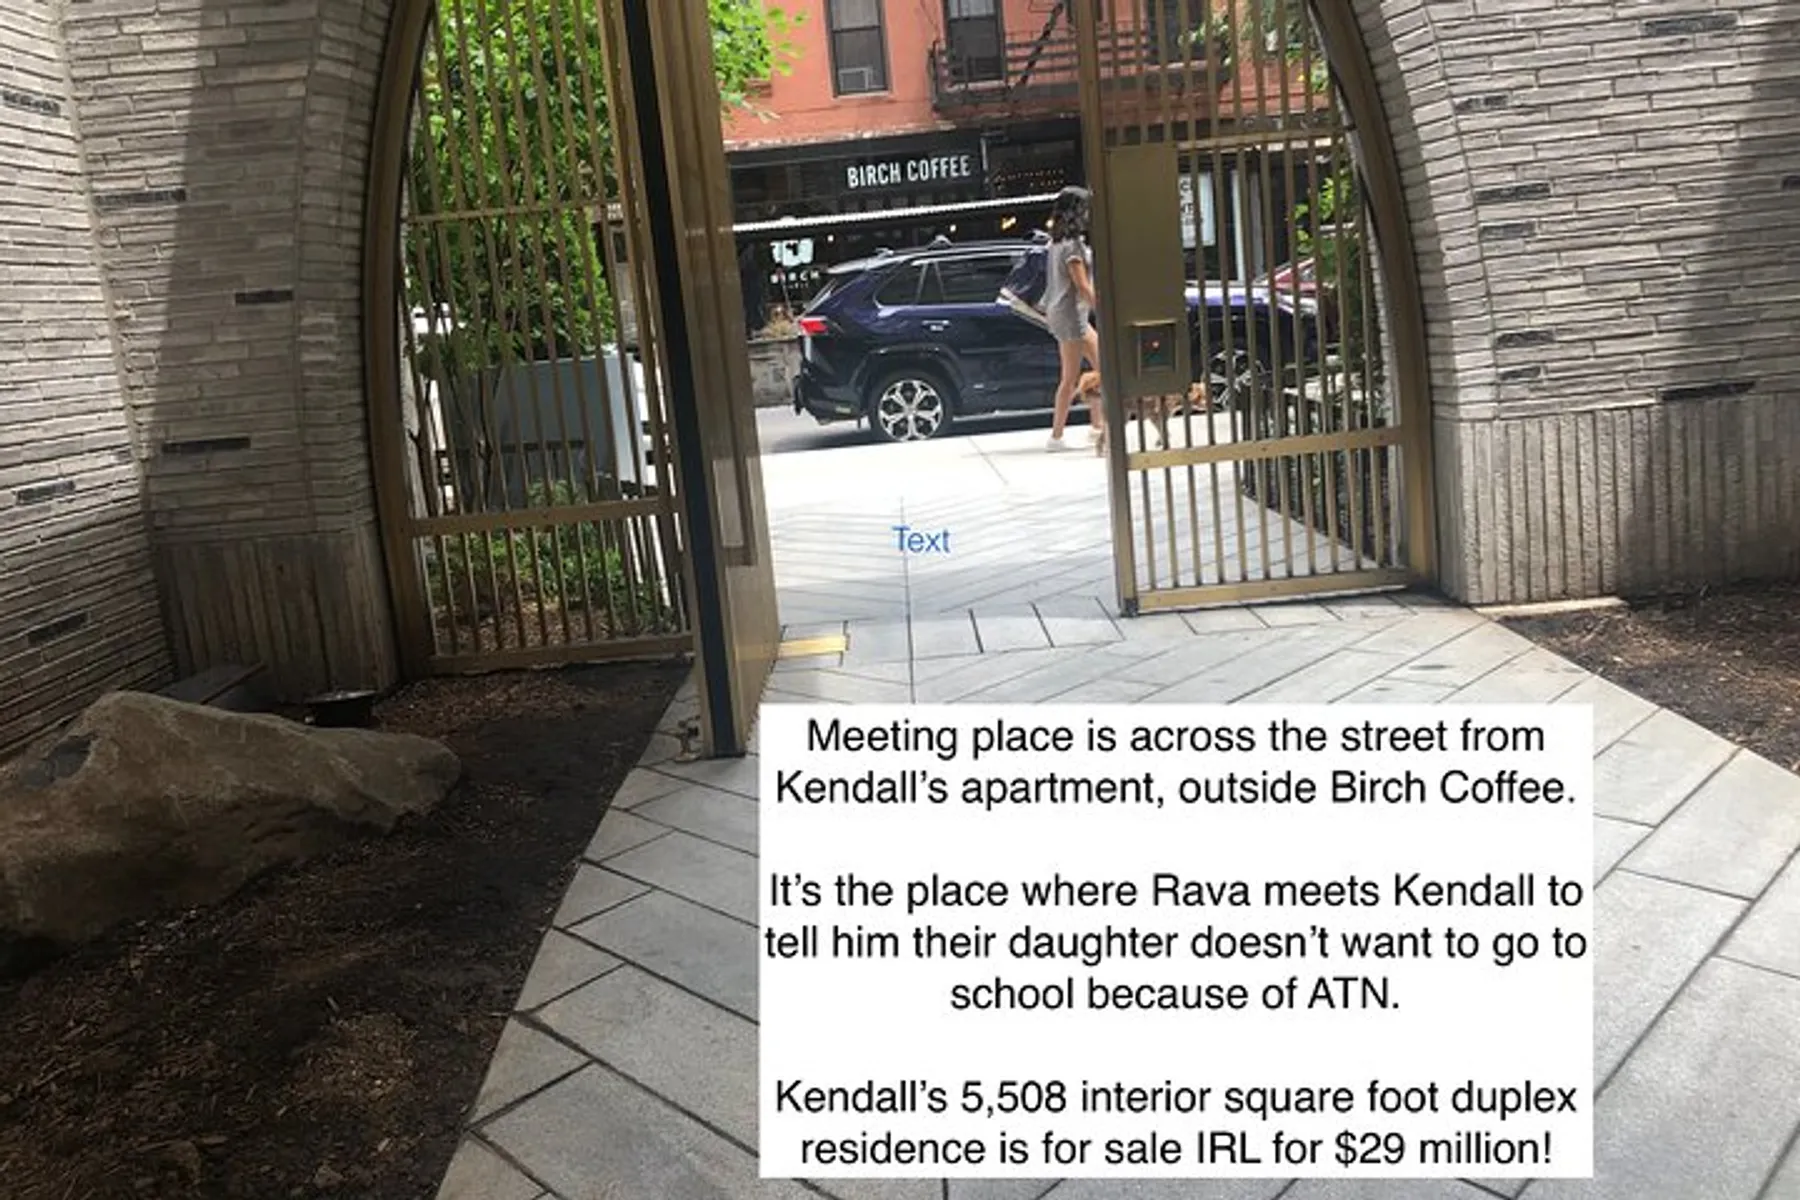 This image shows a sidewalk view through an archway with text overlaid describing a location from a TV show, mentioning a character named Kendall, a meeting spot outside Birch Coffee, and a luxury duplex for sale.